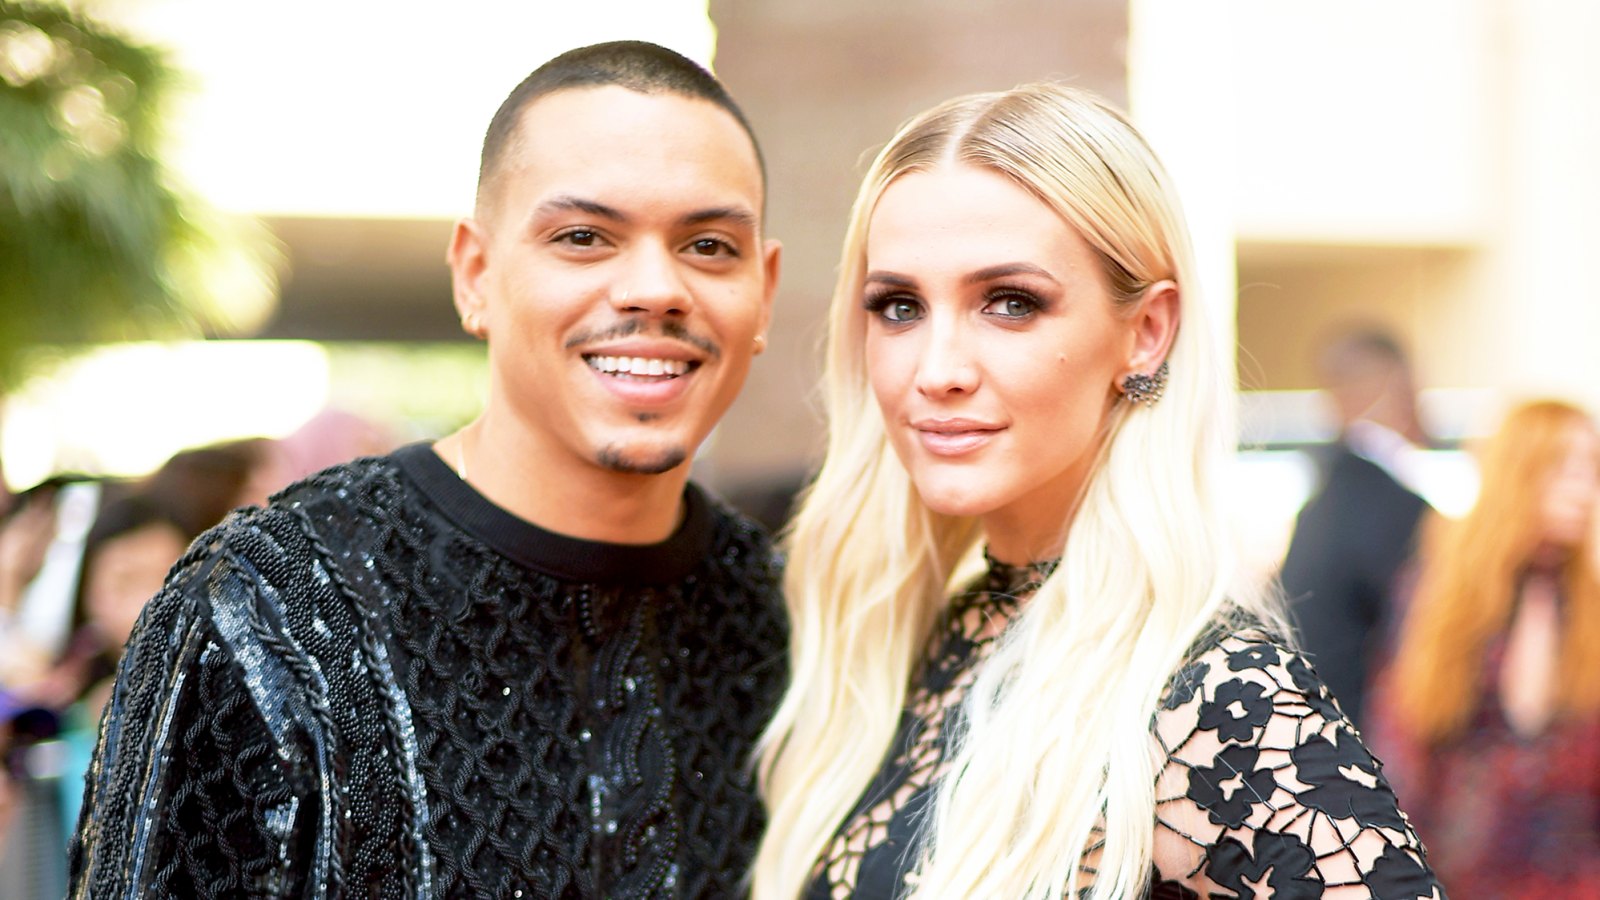 Evan Ross and Ashlee Simpson attend the 2018 Billboard Music Awards at MGM Grand Garden Arena in Las Vegas, Nevada.